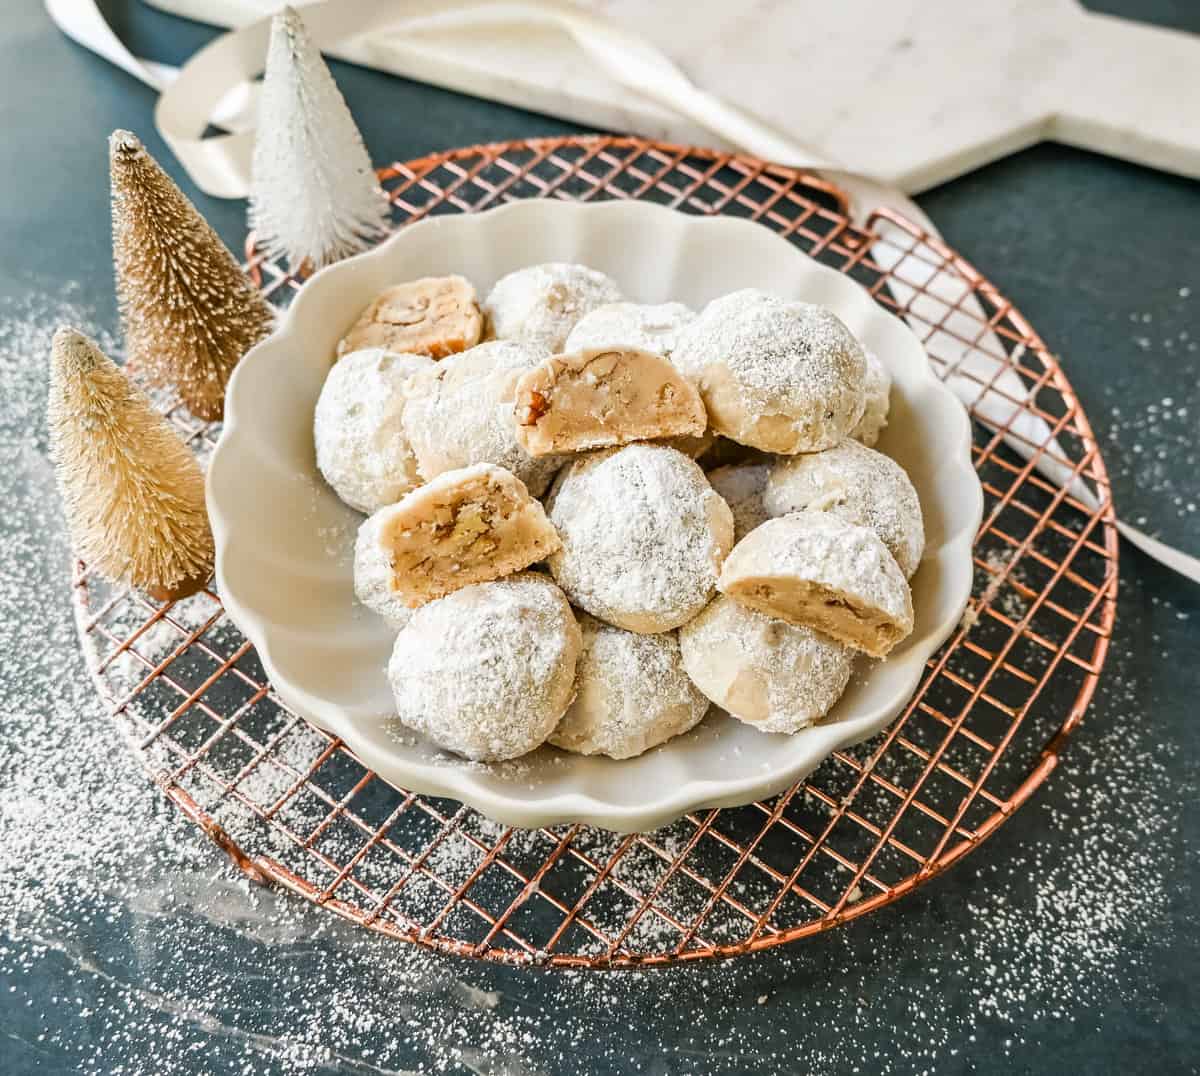 Mexican Wedding Cookies (Snowball Cookies). These buttery, nutty, Mexican wedding cookies are so easy to make and call for only 5 ingredients. These melt-in-your-mouth cookies are perfect to make during the holidays and everyone loves them. The perfect Christmas cookie recipe. A festive Christmas cookie.